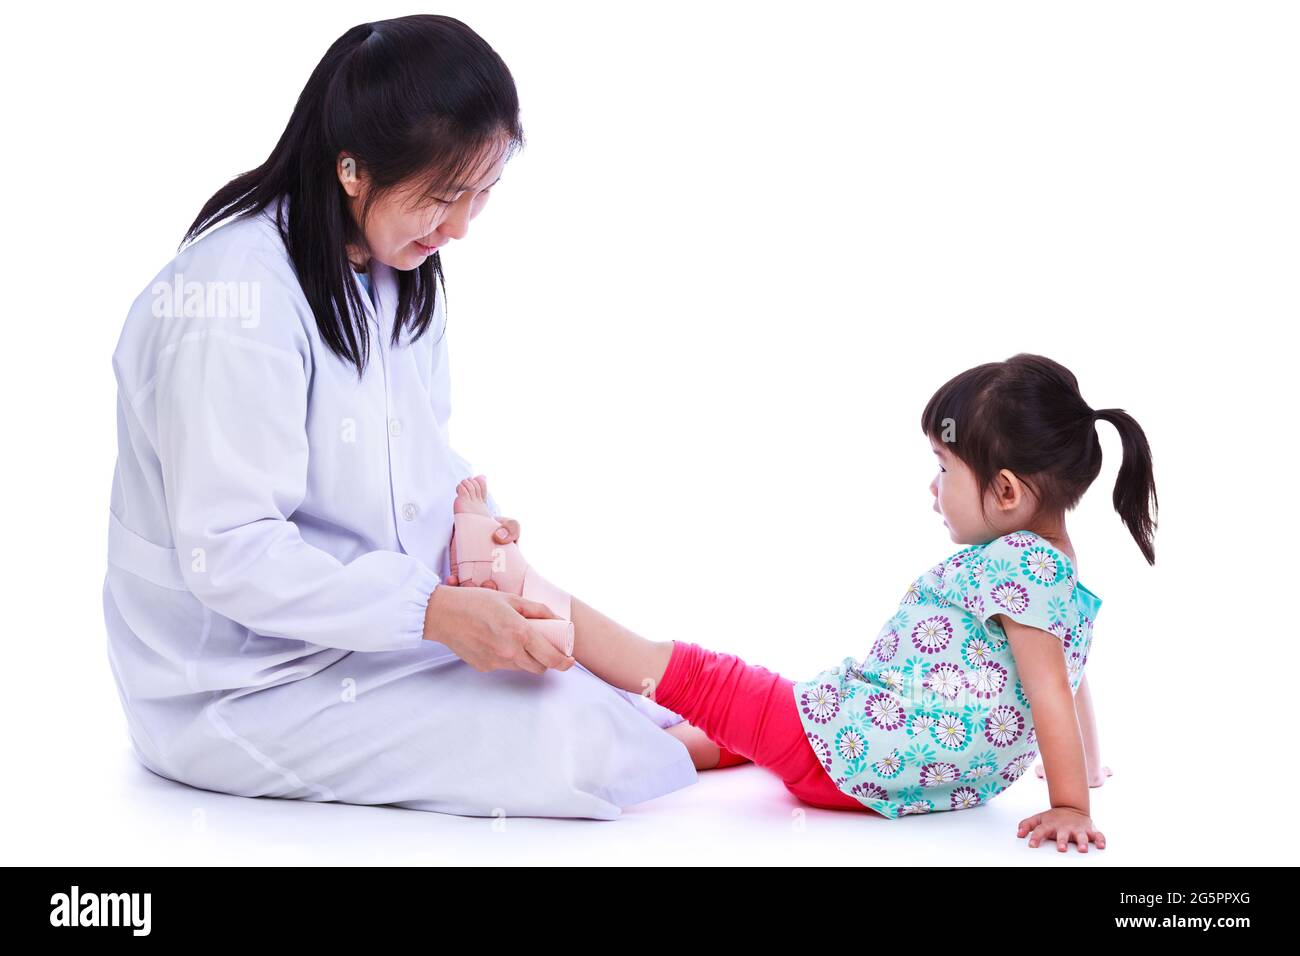 Concept photo of children health and medical care. Doctor give first aid with bandaging at girl's ankle trauma. Studio shot. Isolated on white backgro Stock Photo